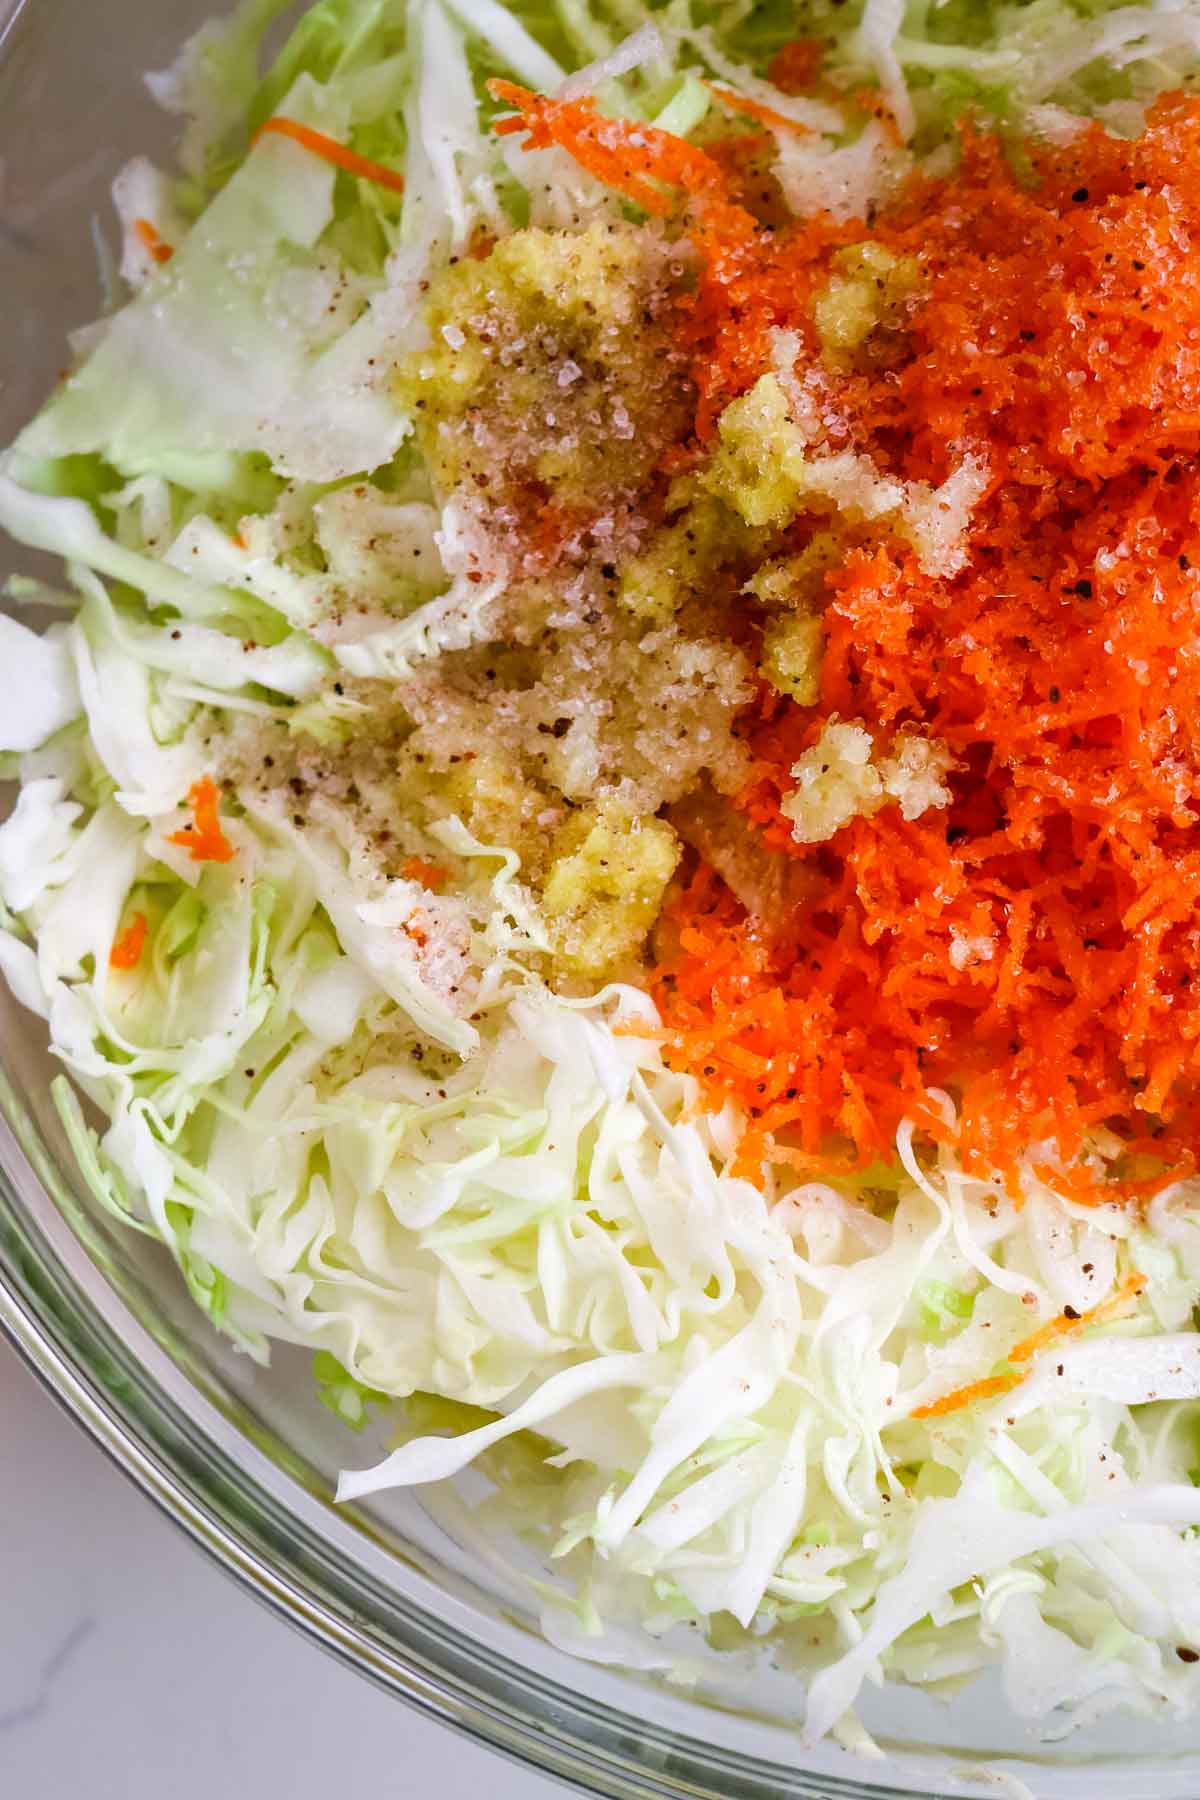 carrot, ginger, and garlic added to cabbage.